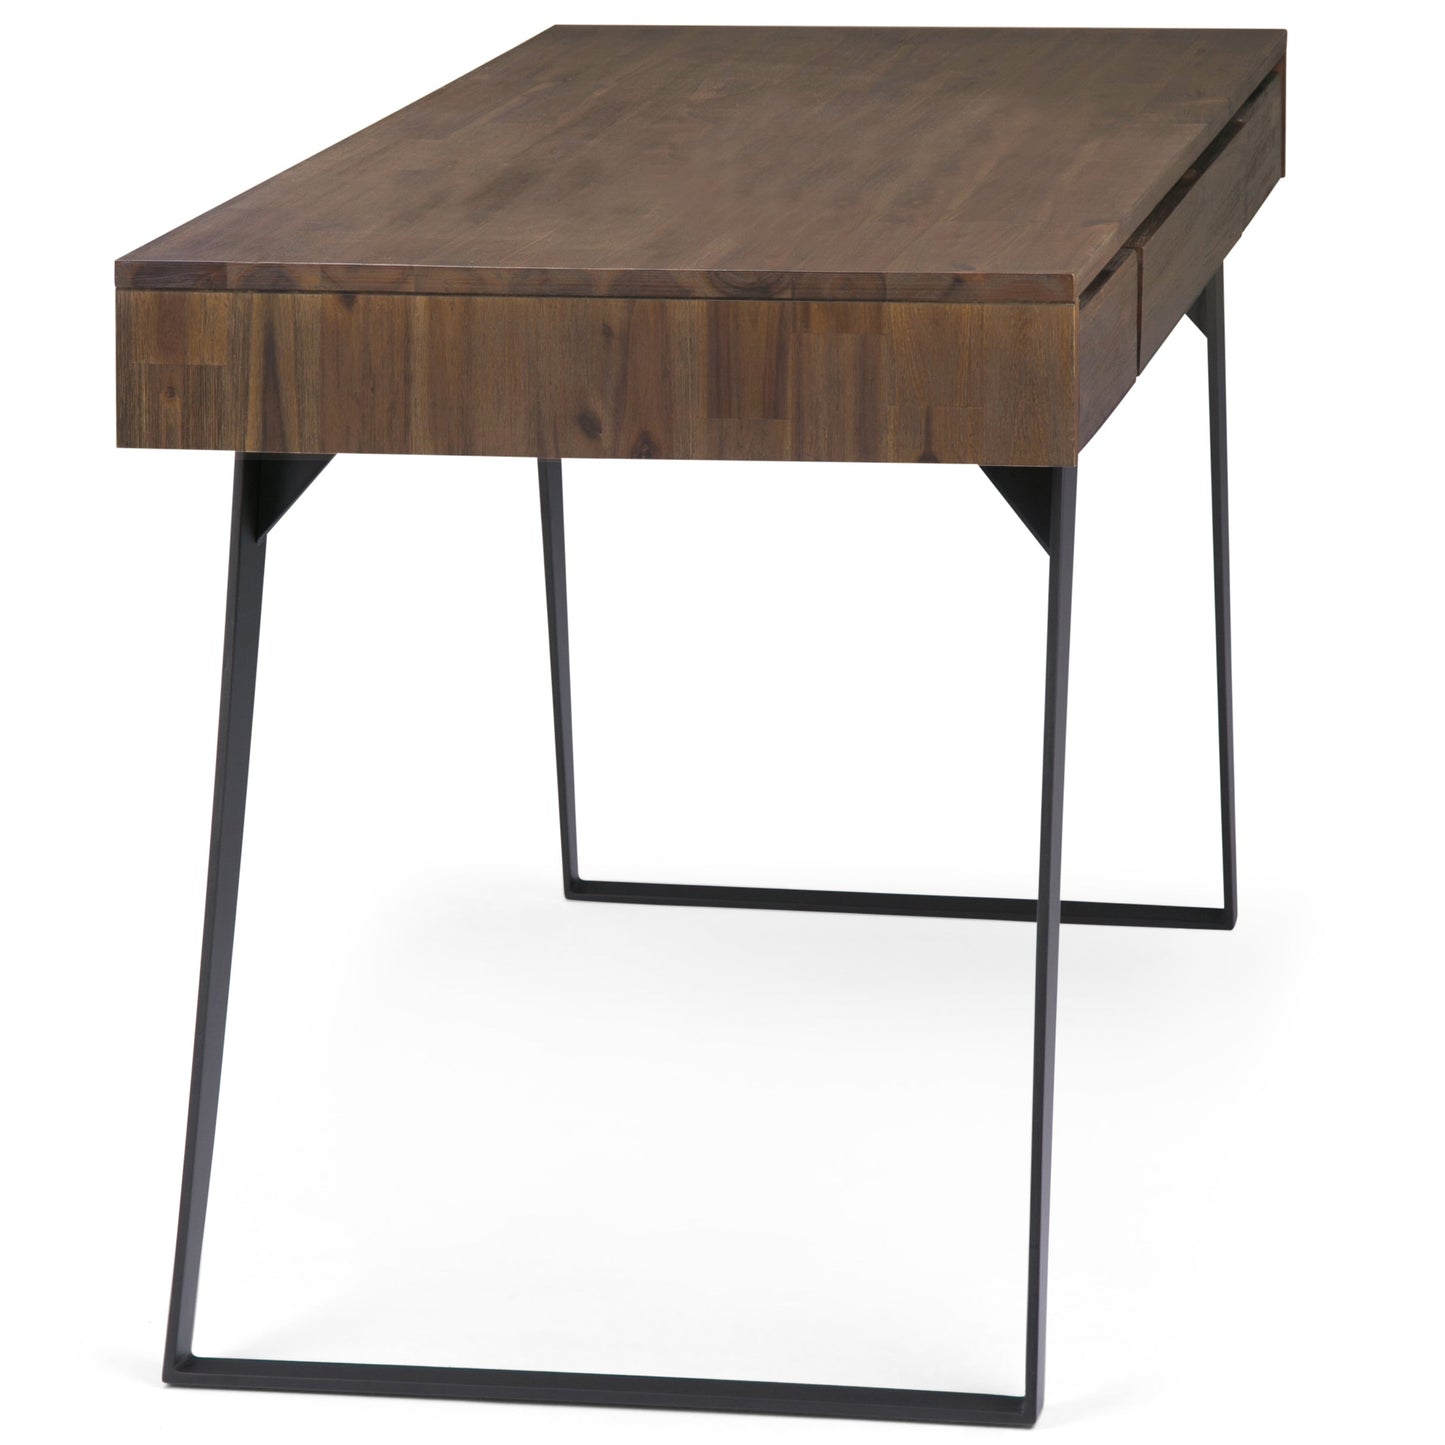 Lowry - Desk - Rustic Natural Aged Brown